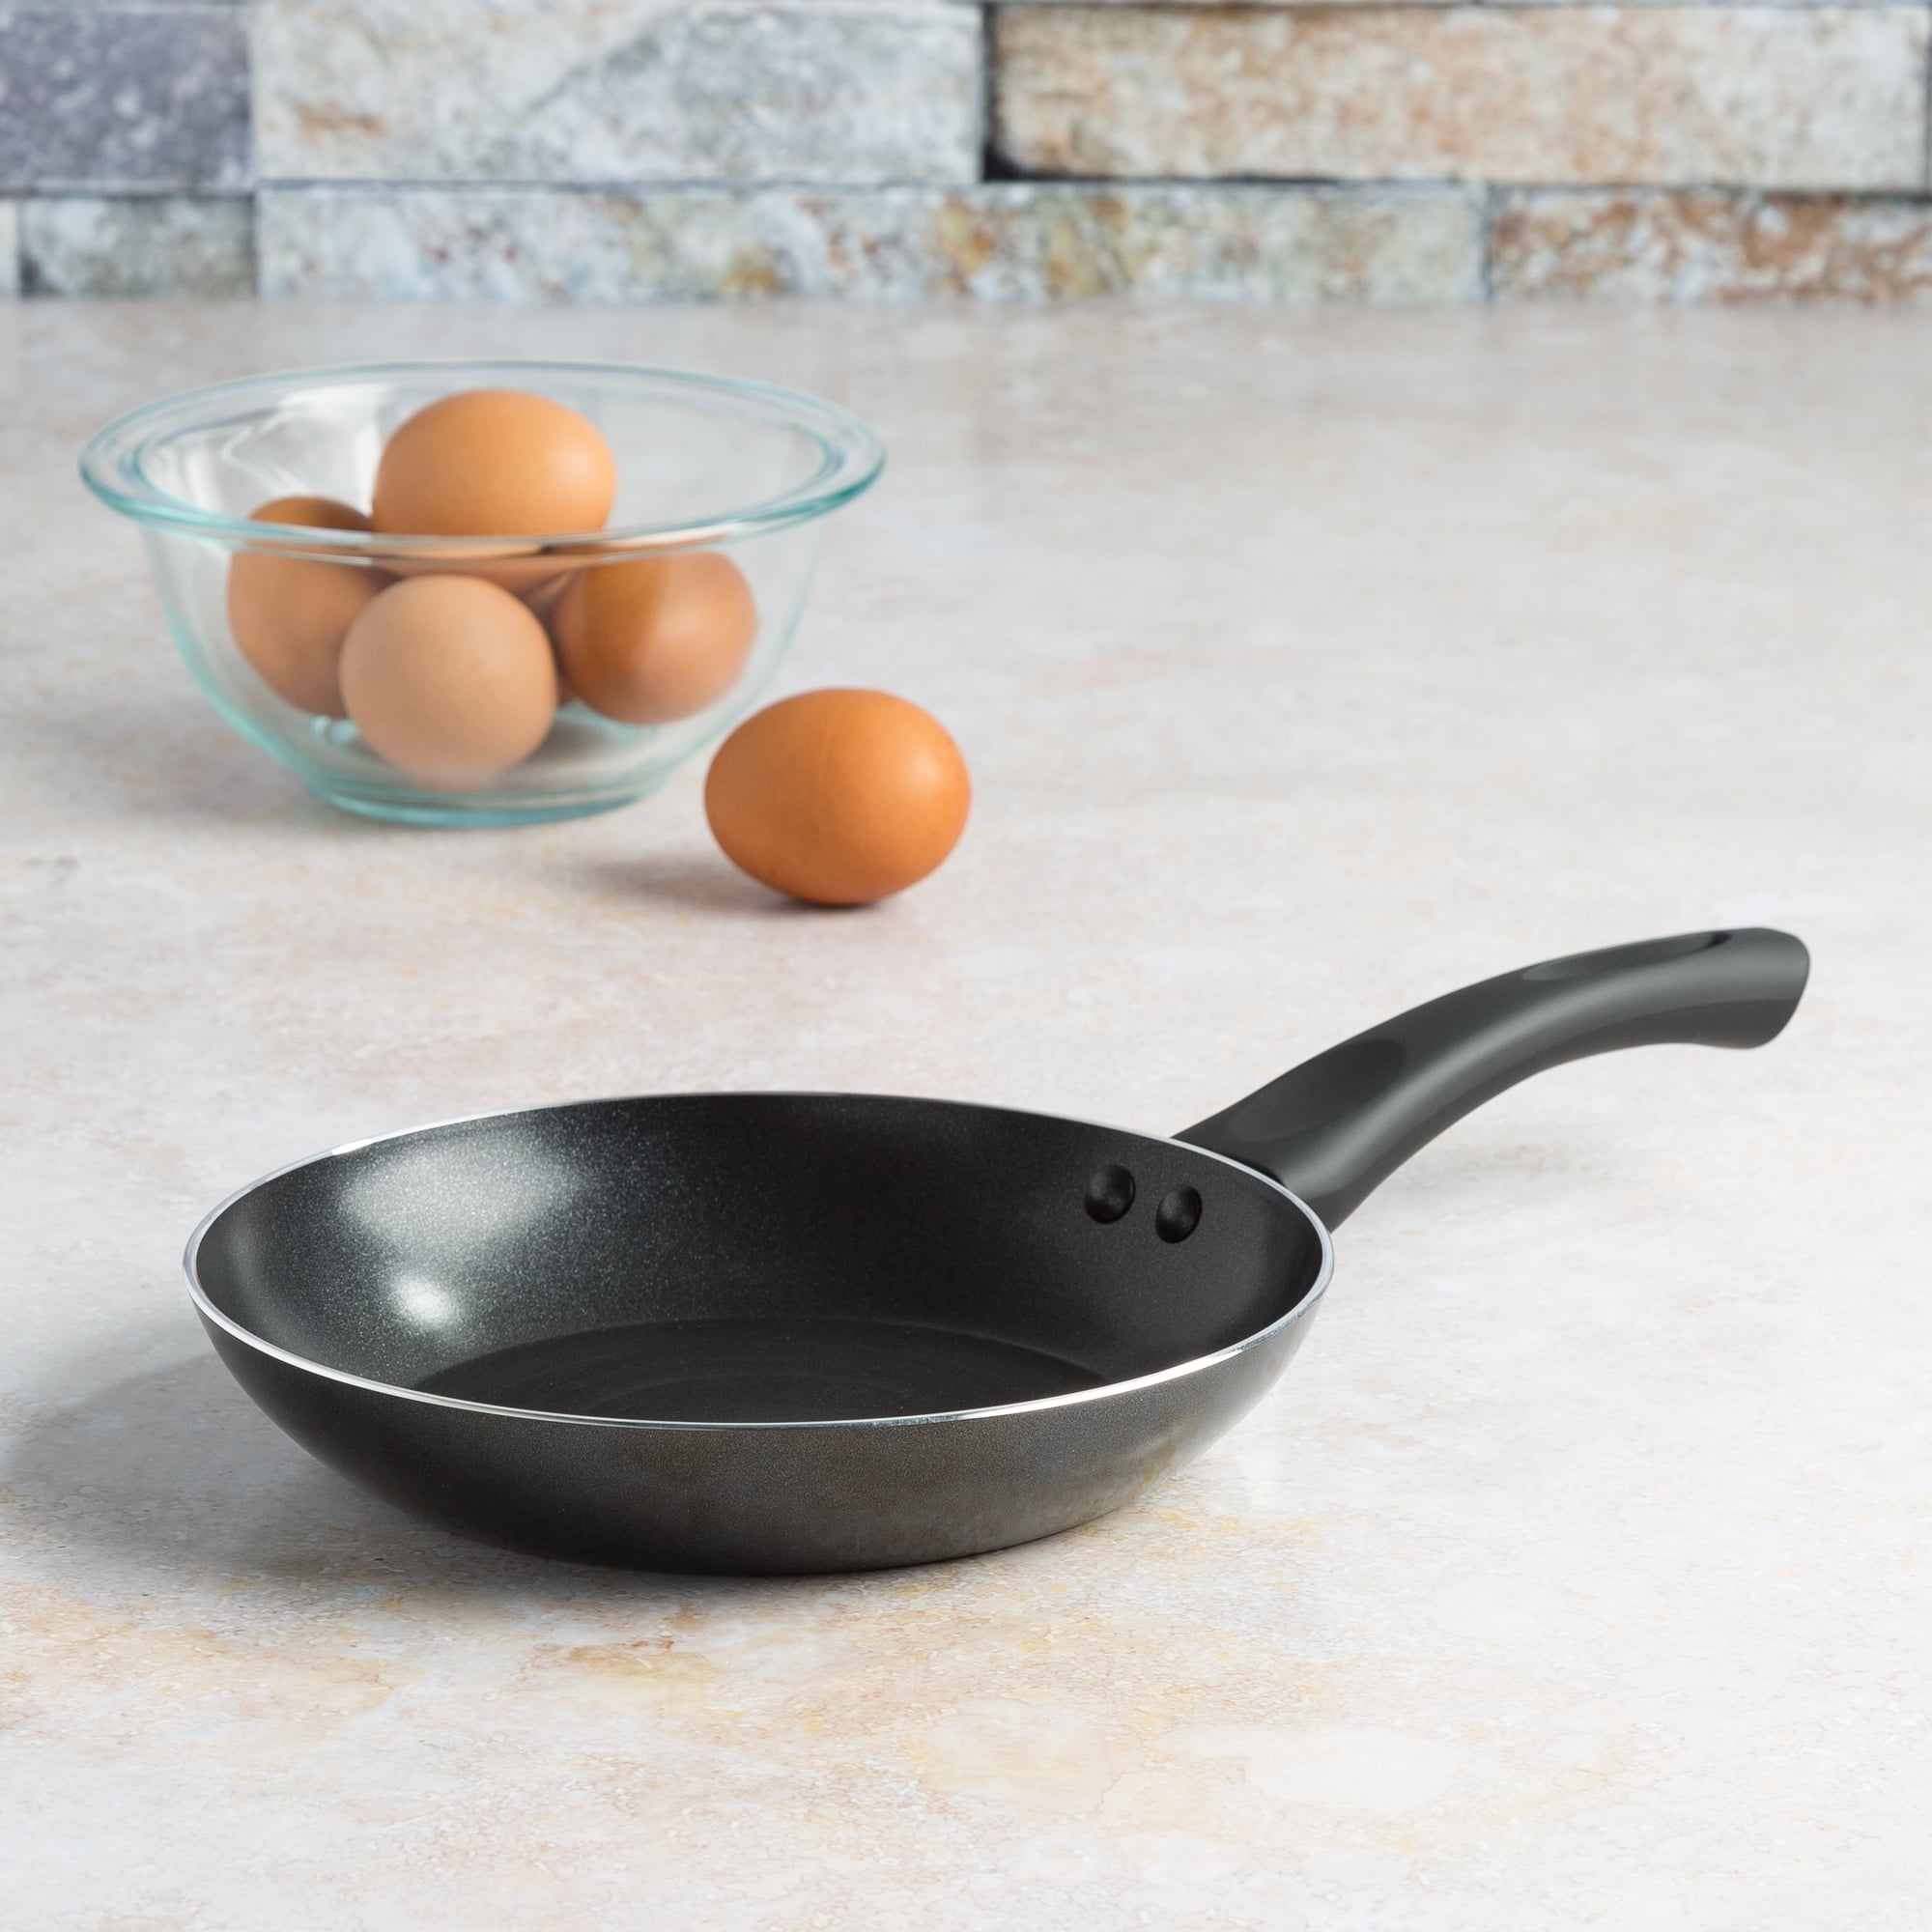 MsMk Non-Stick Small 8 inch Enamel Frying Pan Grey - Stain-Resistant, Dishwasher Safe, Easy to Clean - Perfect for Runny Eggs, Steak, Avocado 